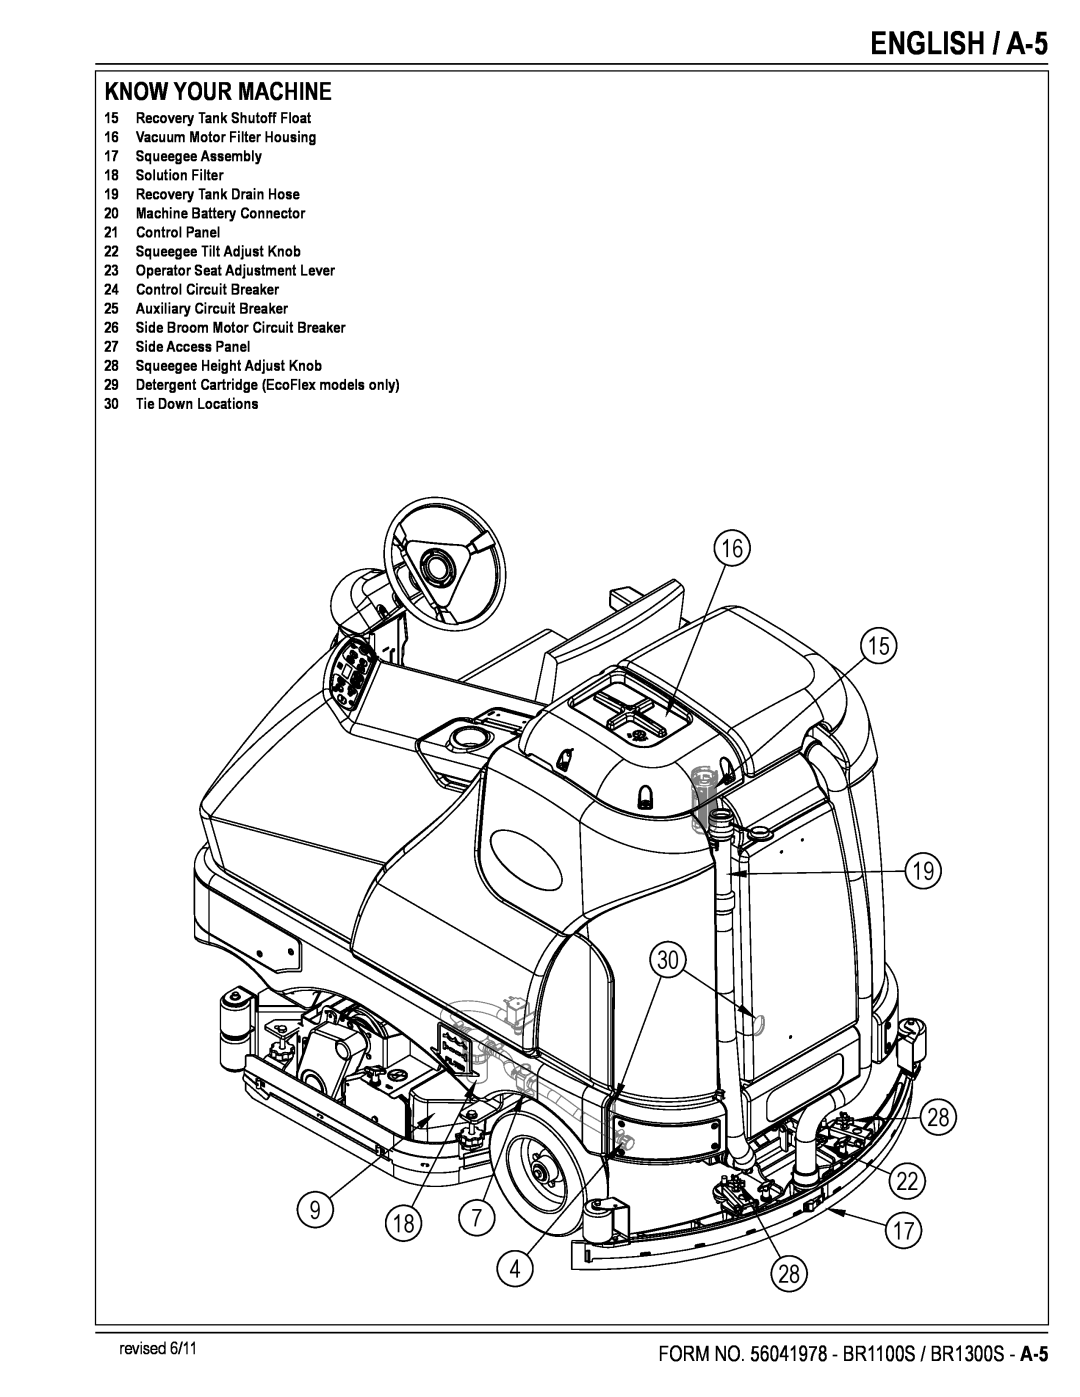 Nilfisk-Advance America manual ENGLISH / A-5, FORM NO. 56041978 - BR1100S / BR1300S - A-5, Know Your Machine, 28 22 17 